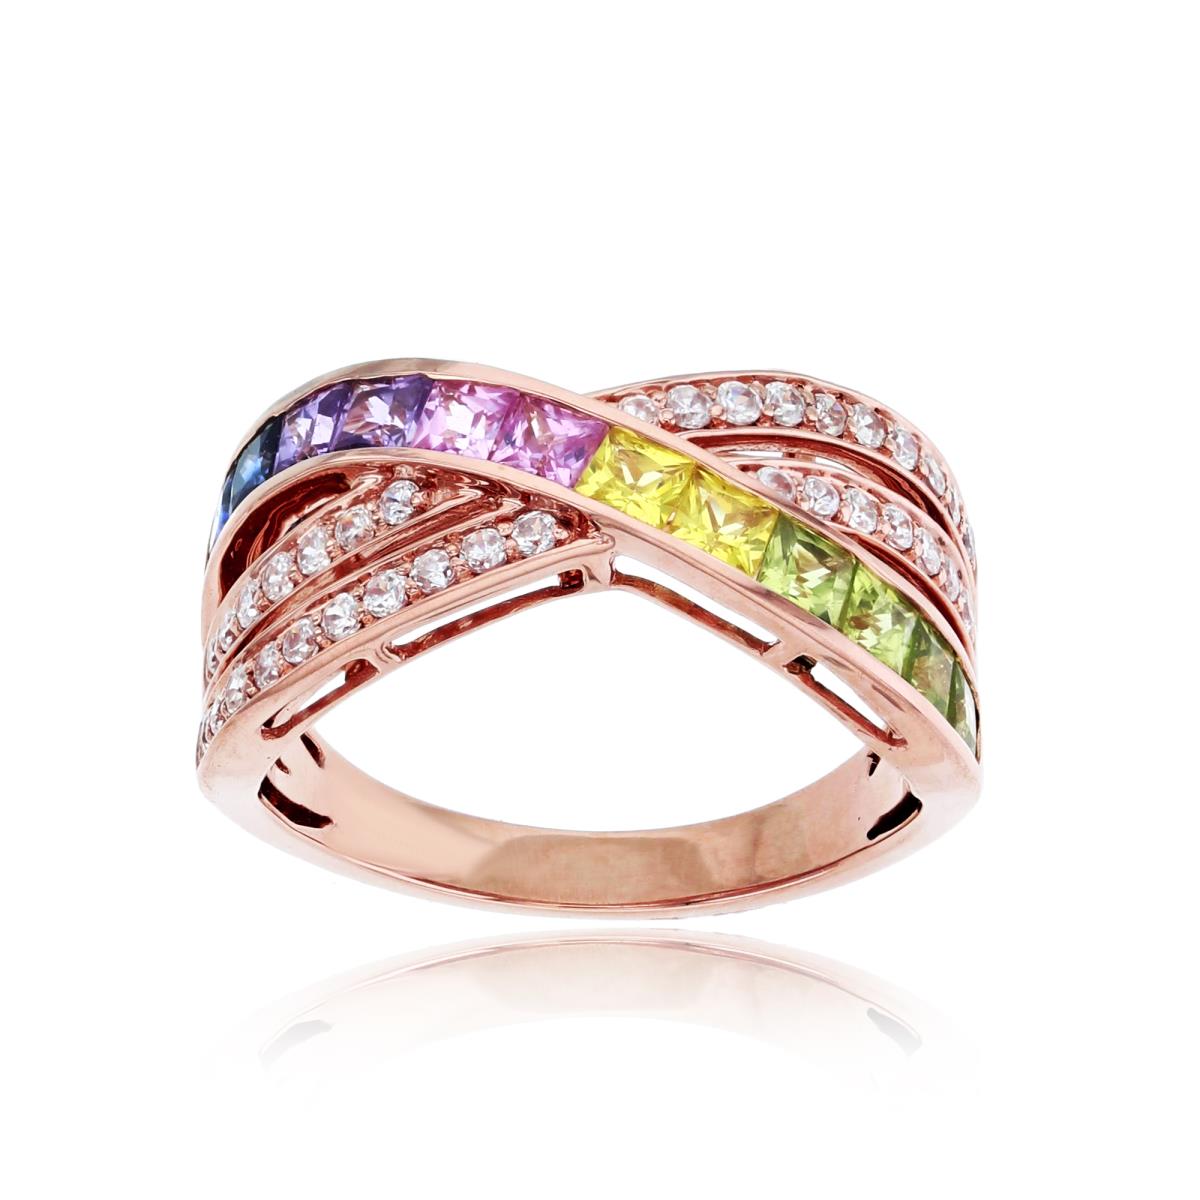 14K Rose Gold Rd White Sapphire & 2.5mm SQ Multicolor Criss/Cross Ring (Without backing)